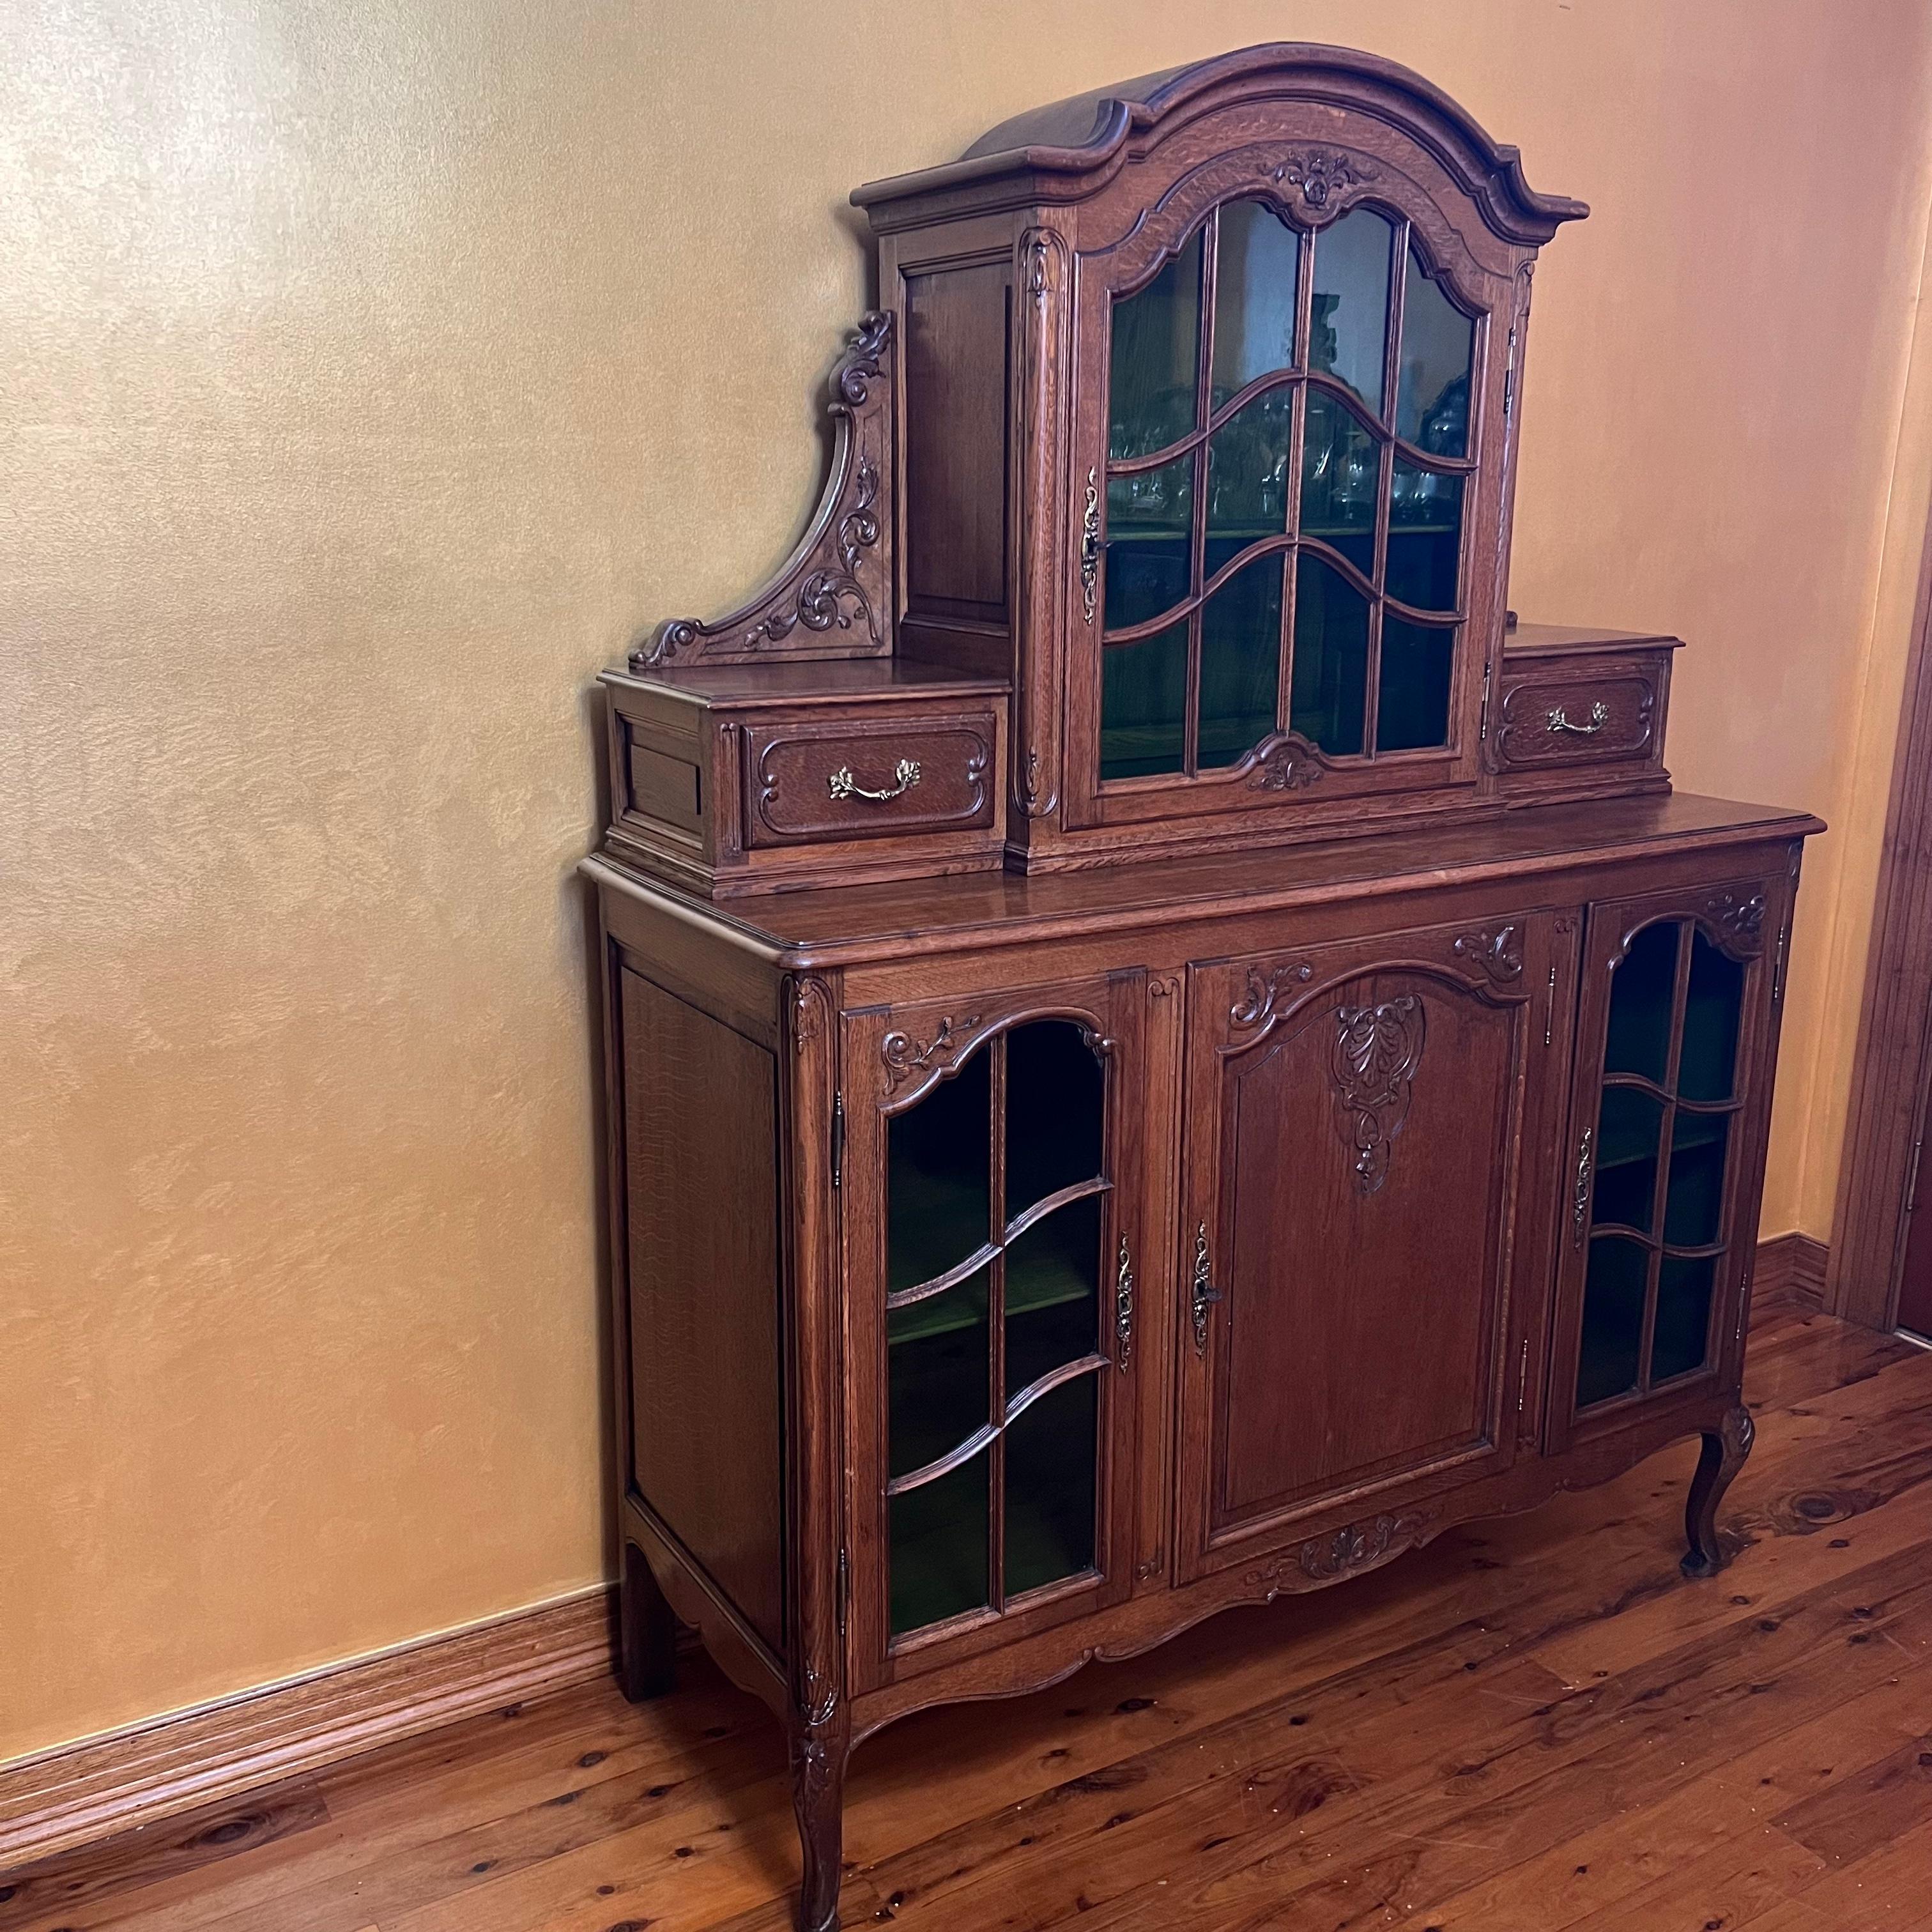 French windows on top and two panels on bottom, two drawers on top and two shelves of storage on bottom, lead light green glass, lock on top works locks on bottom dont work, this item has been French Polished 

Circa: 19th Century 

Material: